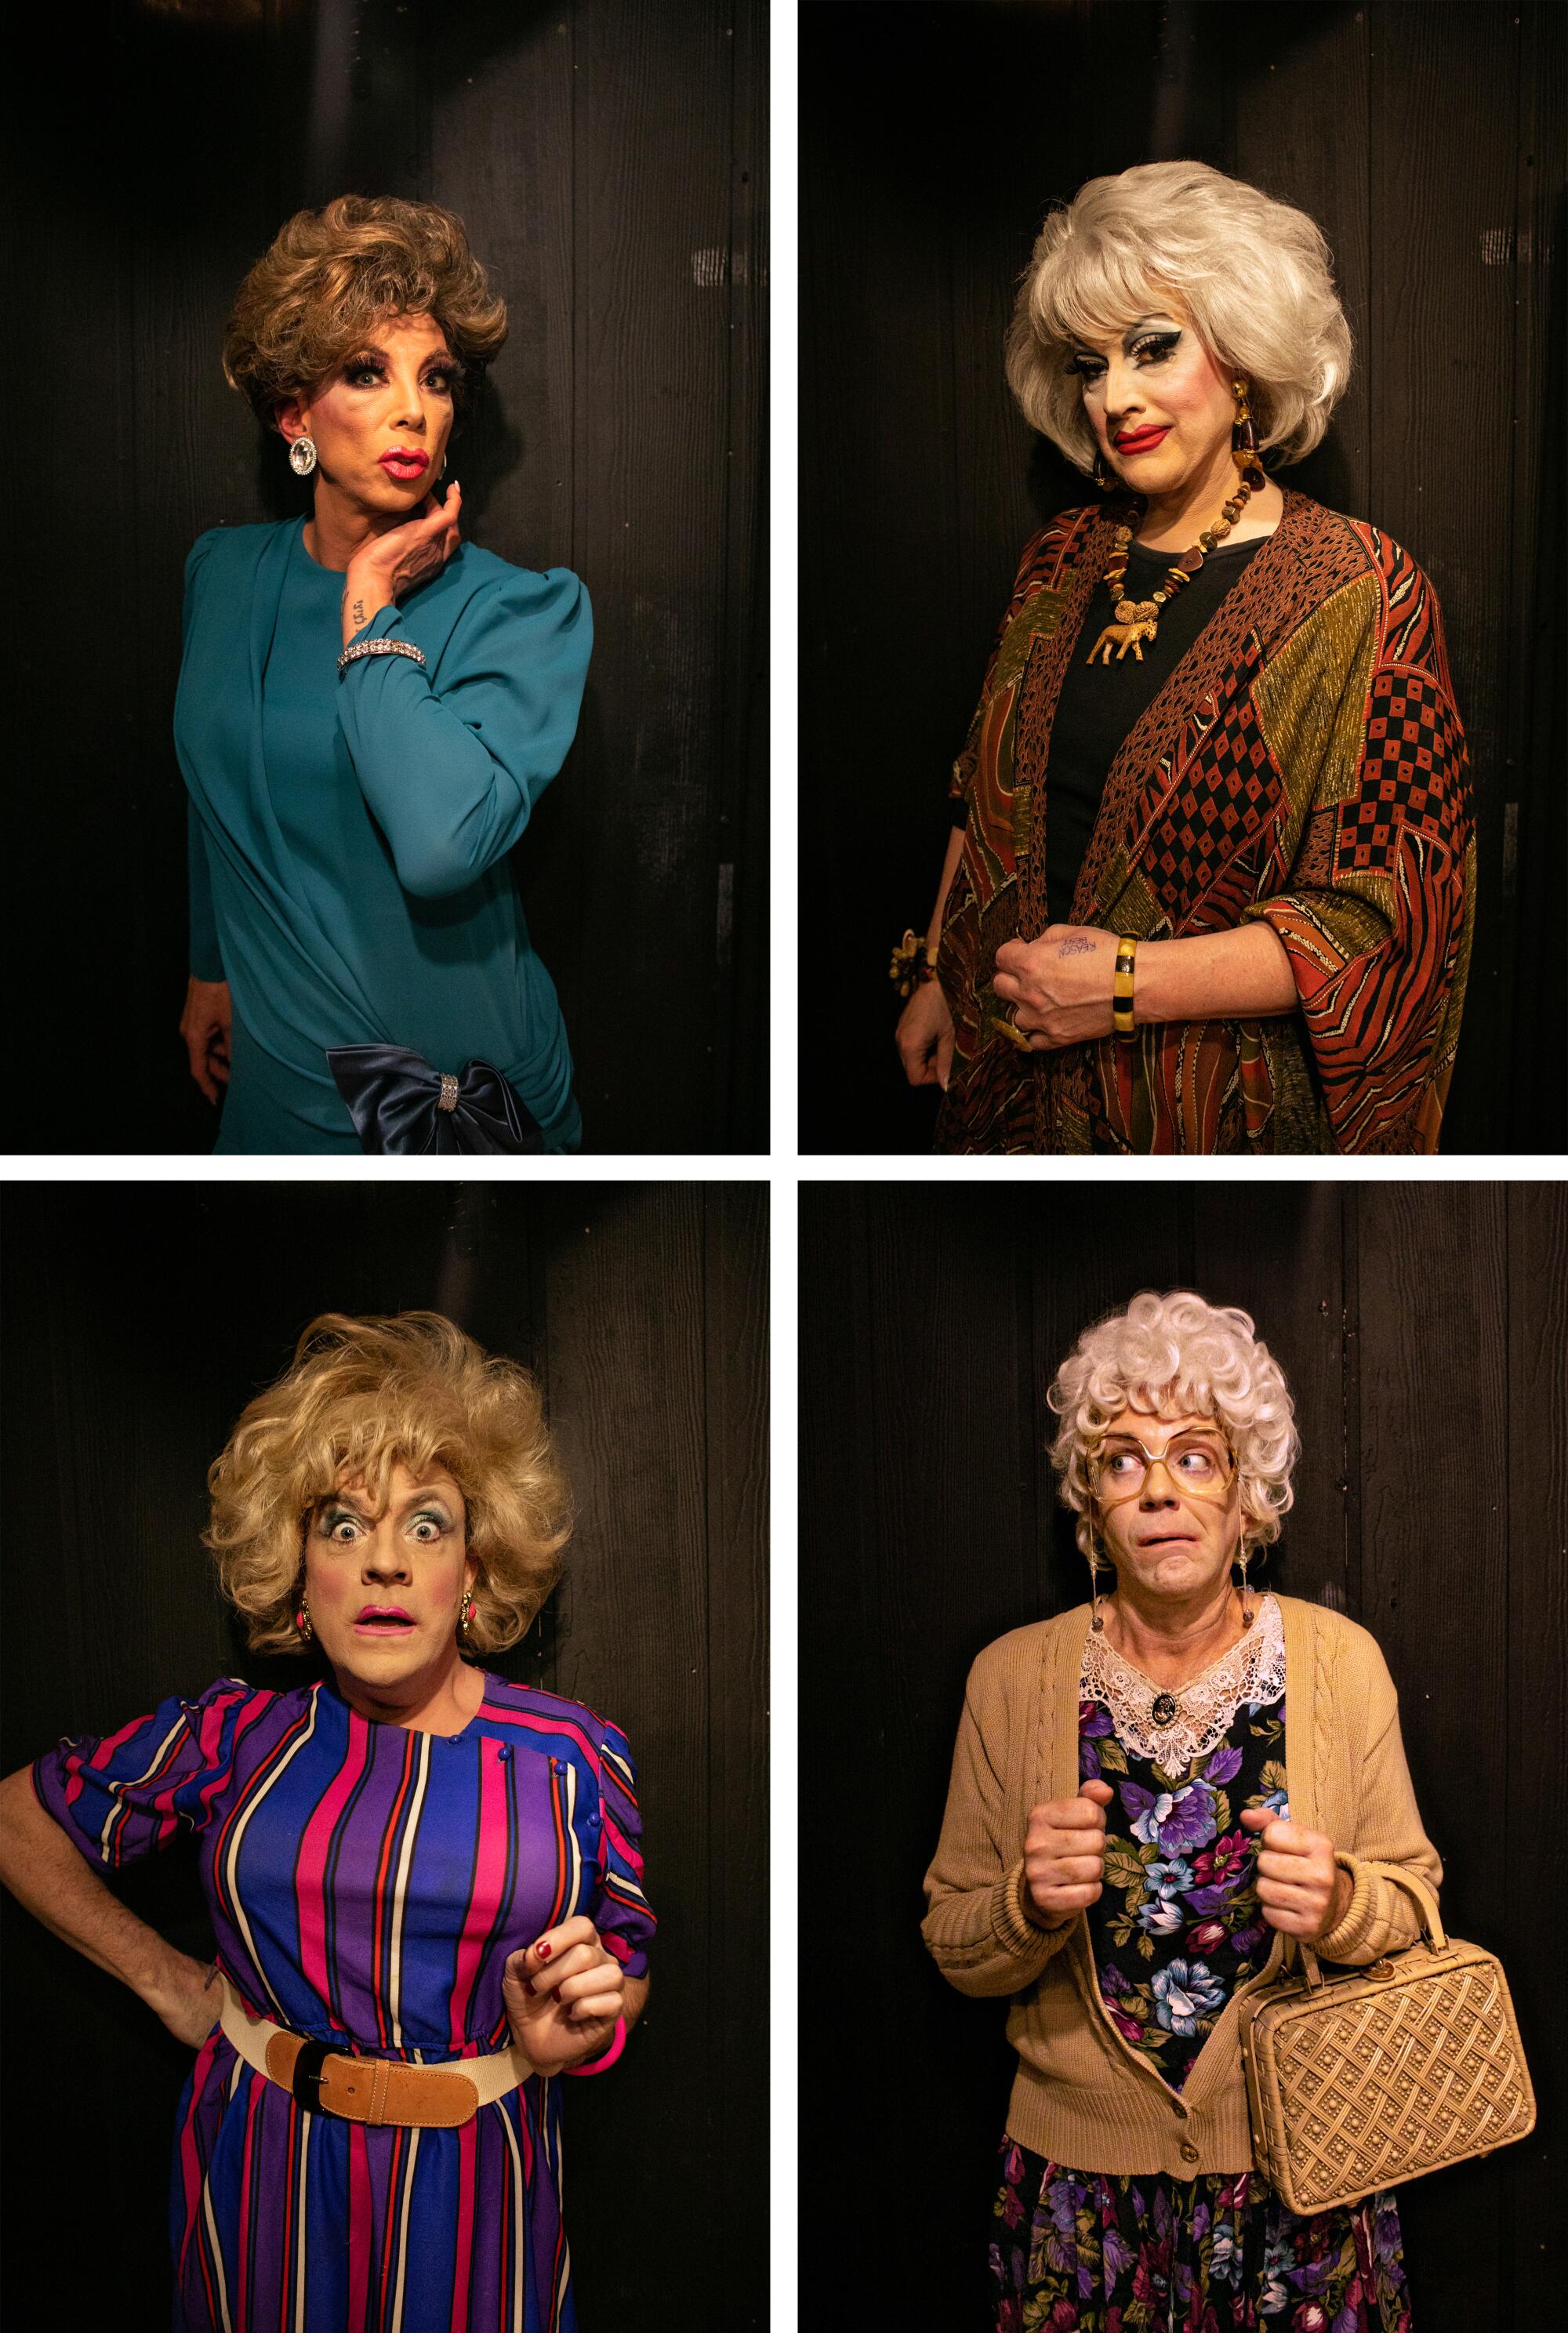 A grid of four performers made up as "Golden Girls" characters.